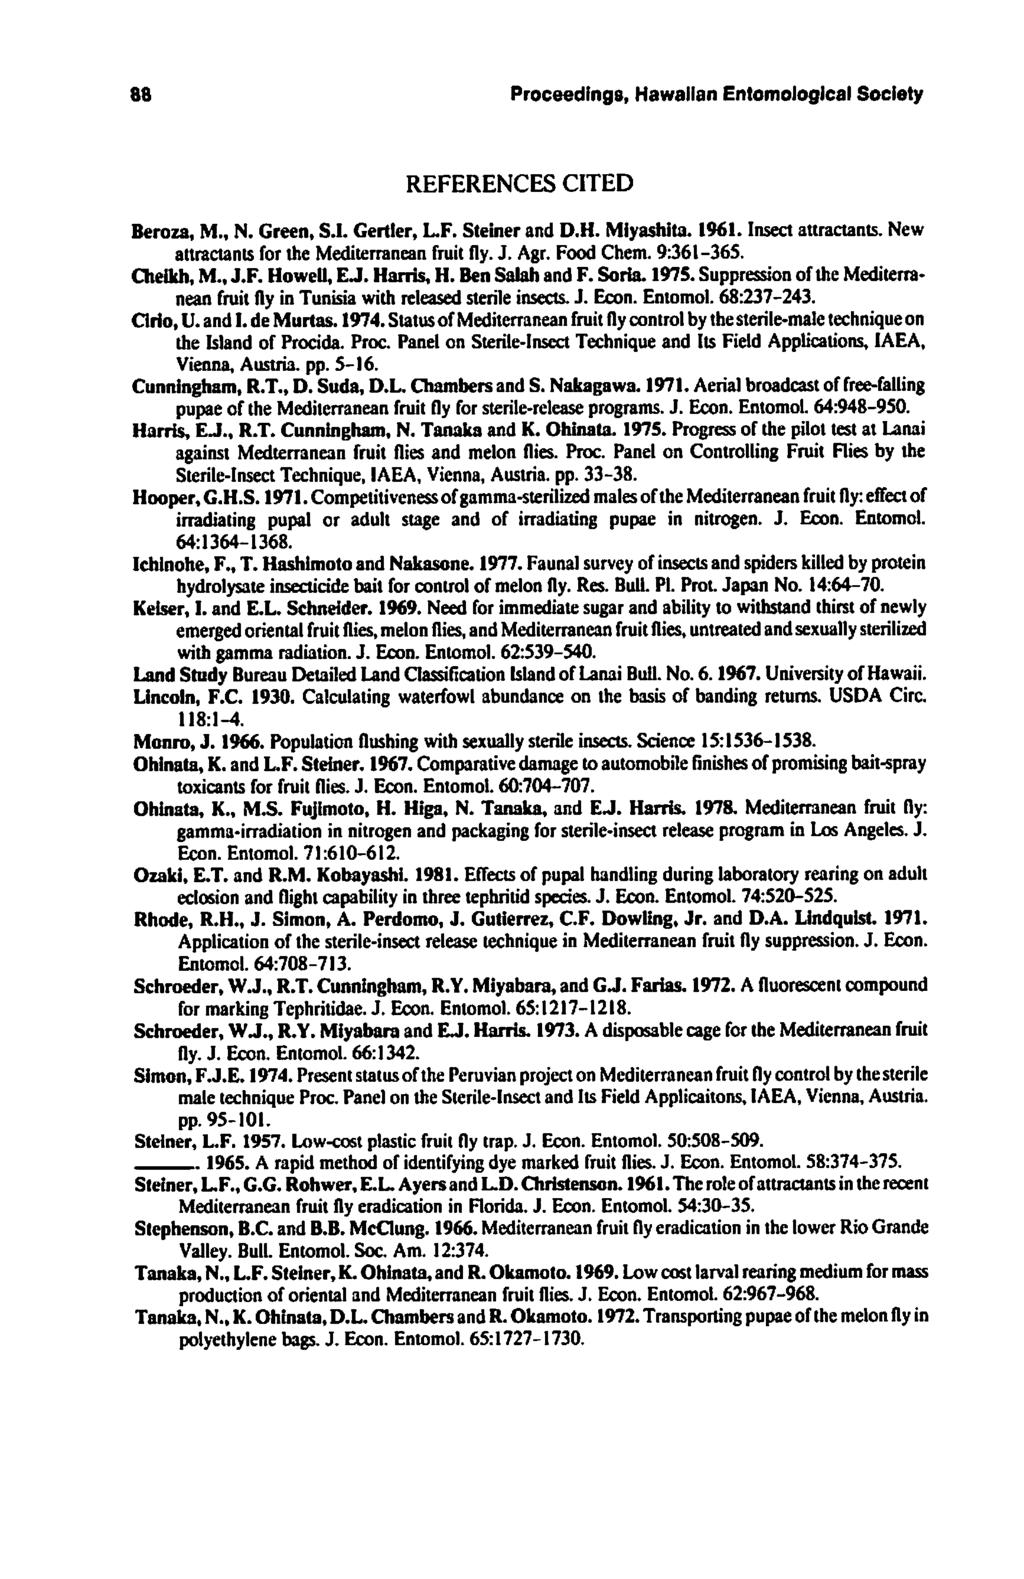 88 Proceedings, Hawaiian Entomological Society REFERENCES CITED Beroza, M., N. Green, S.I. Center, L.F. Steiner and D.H. Mlyashita. 1961. Insect attractants.